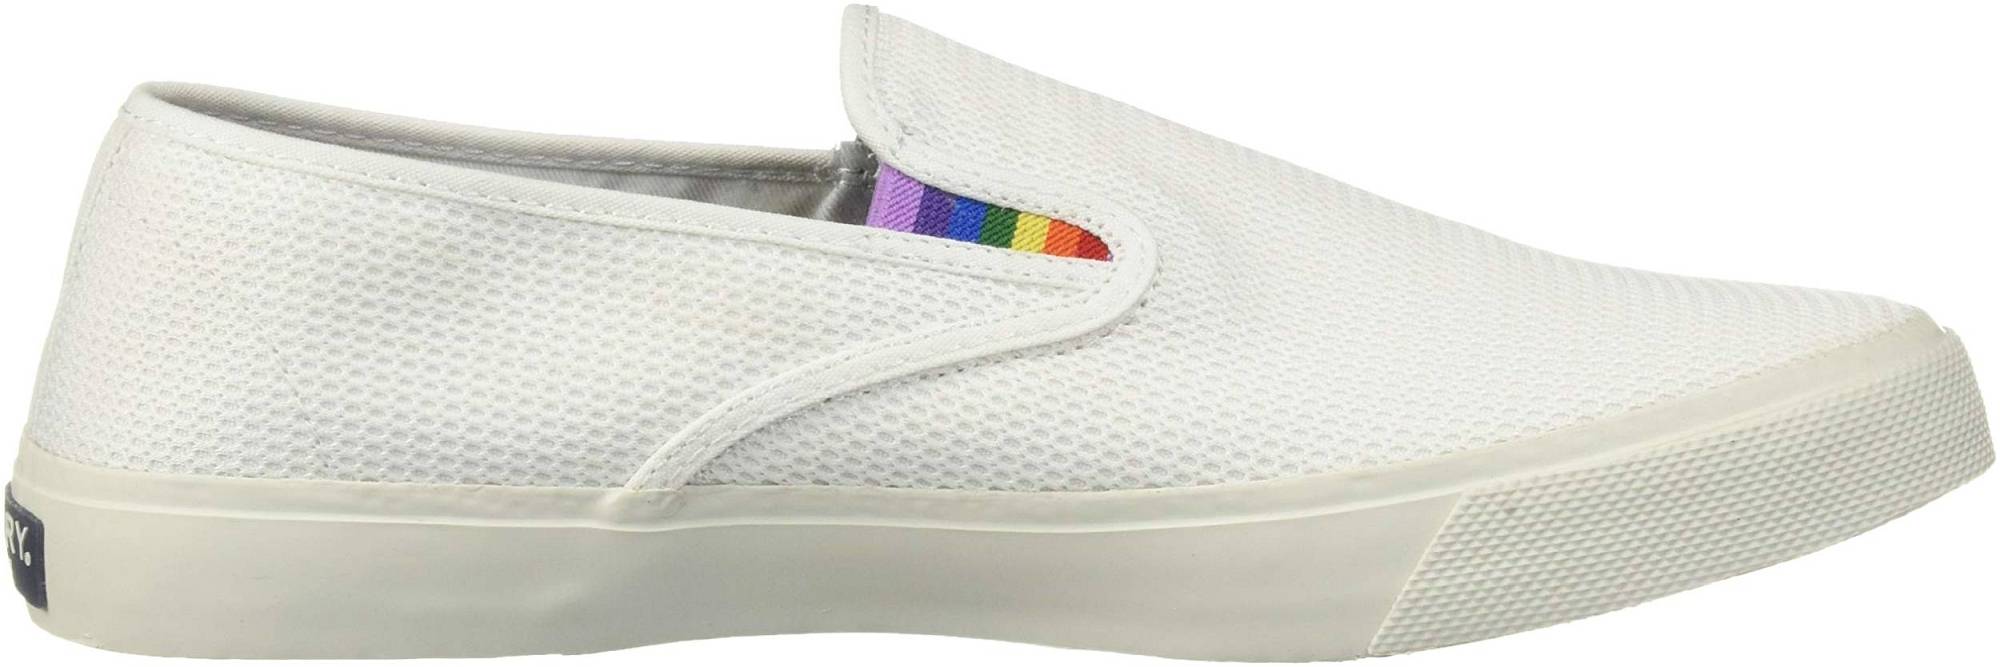 Sperry Captain's Slip On Pride Sneaker – Shoes Reviews & Reasons To Buy